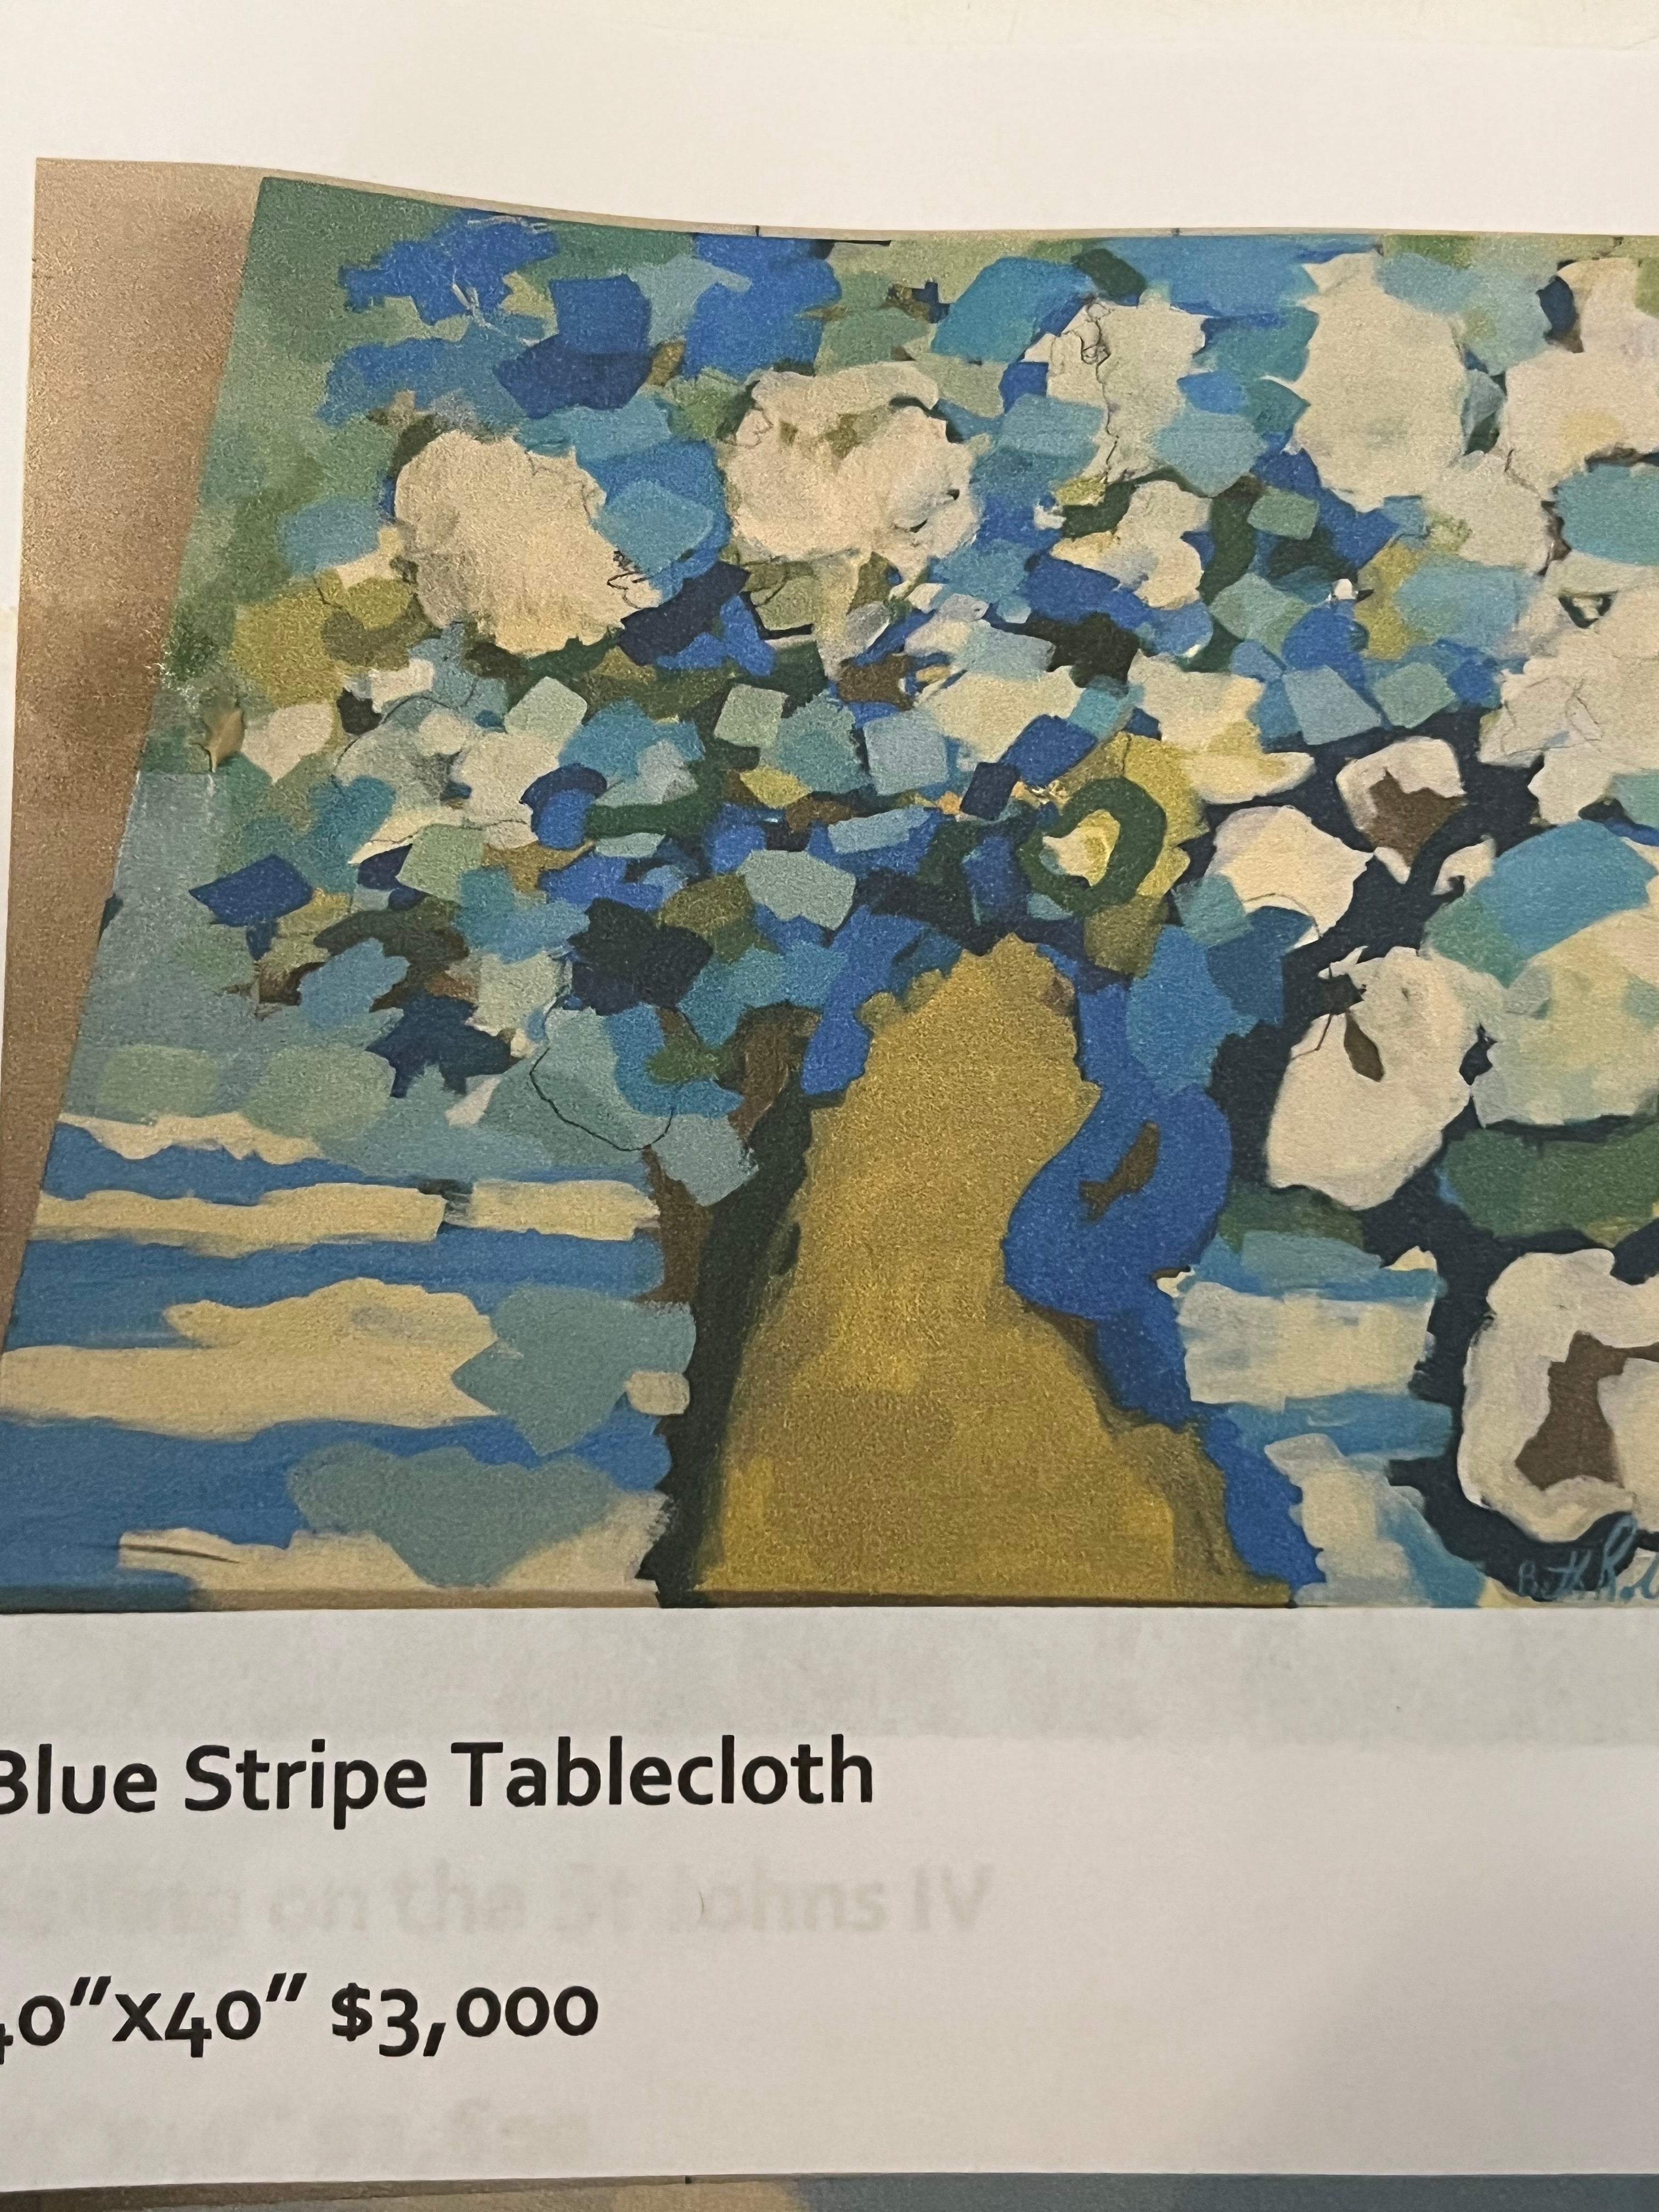 Blue Striped Tablecloth by Beth Robision